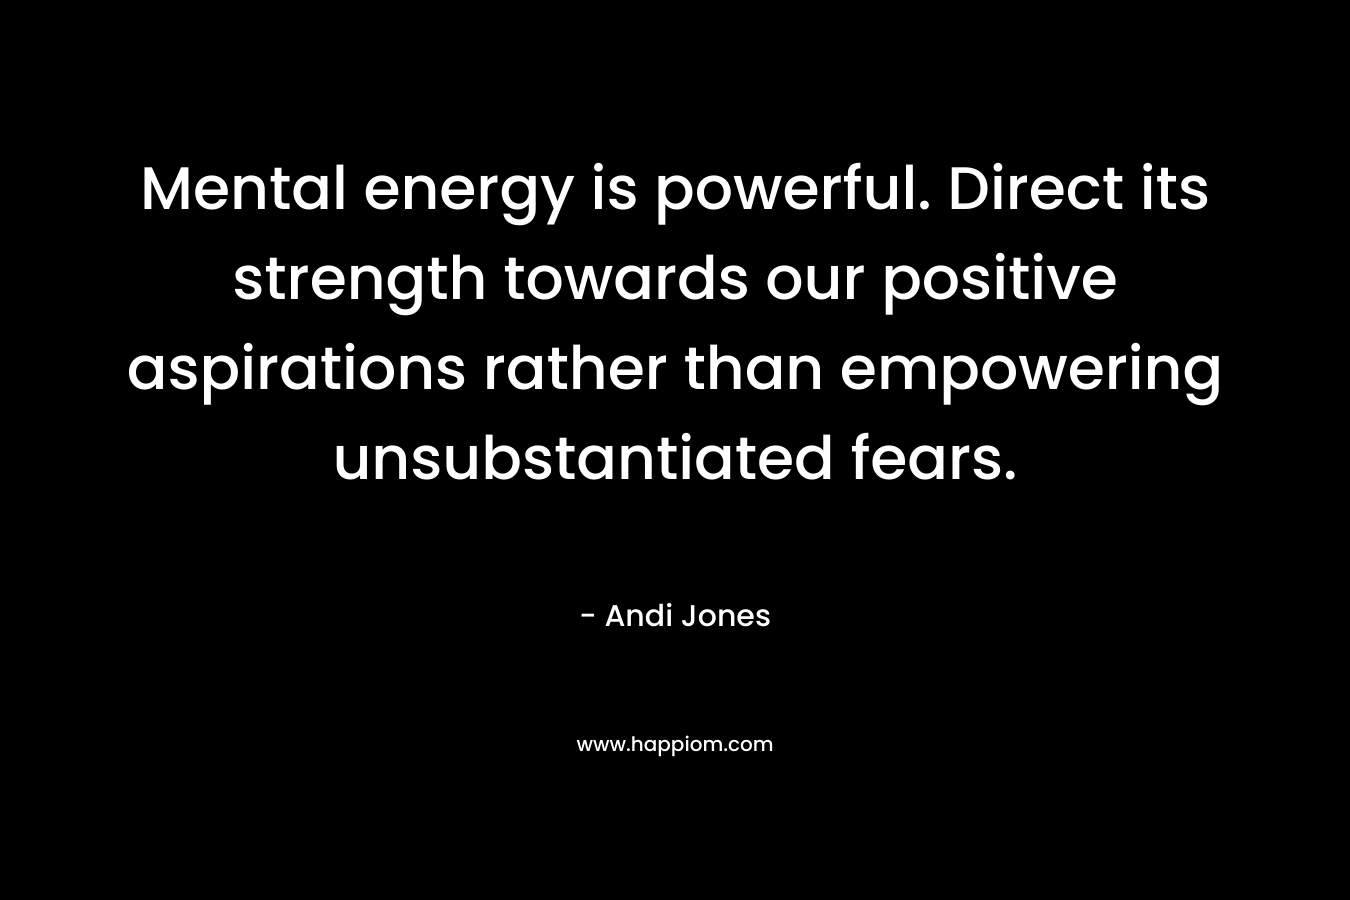 Mental energy is powerful. Direct its strength towards our positive aspirations rather than empowering unsubstantiated fears.